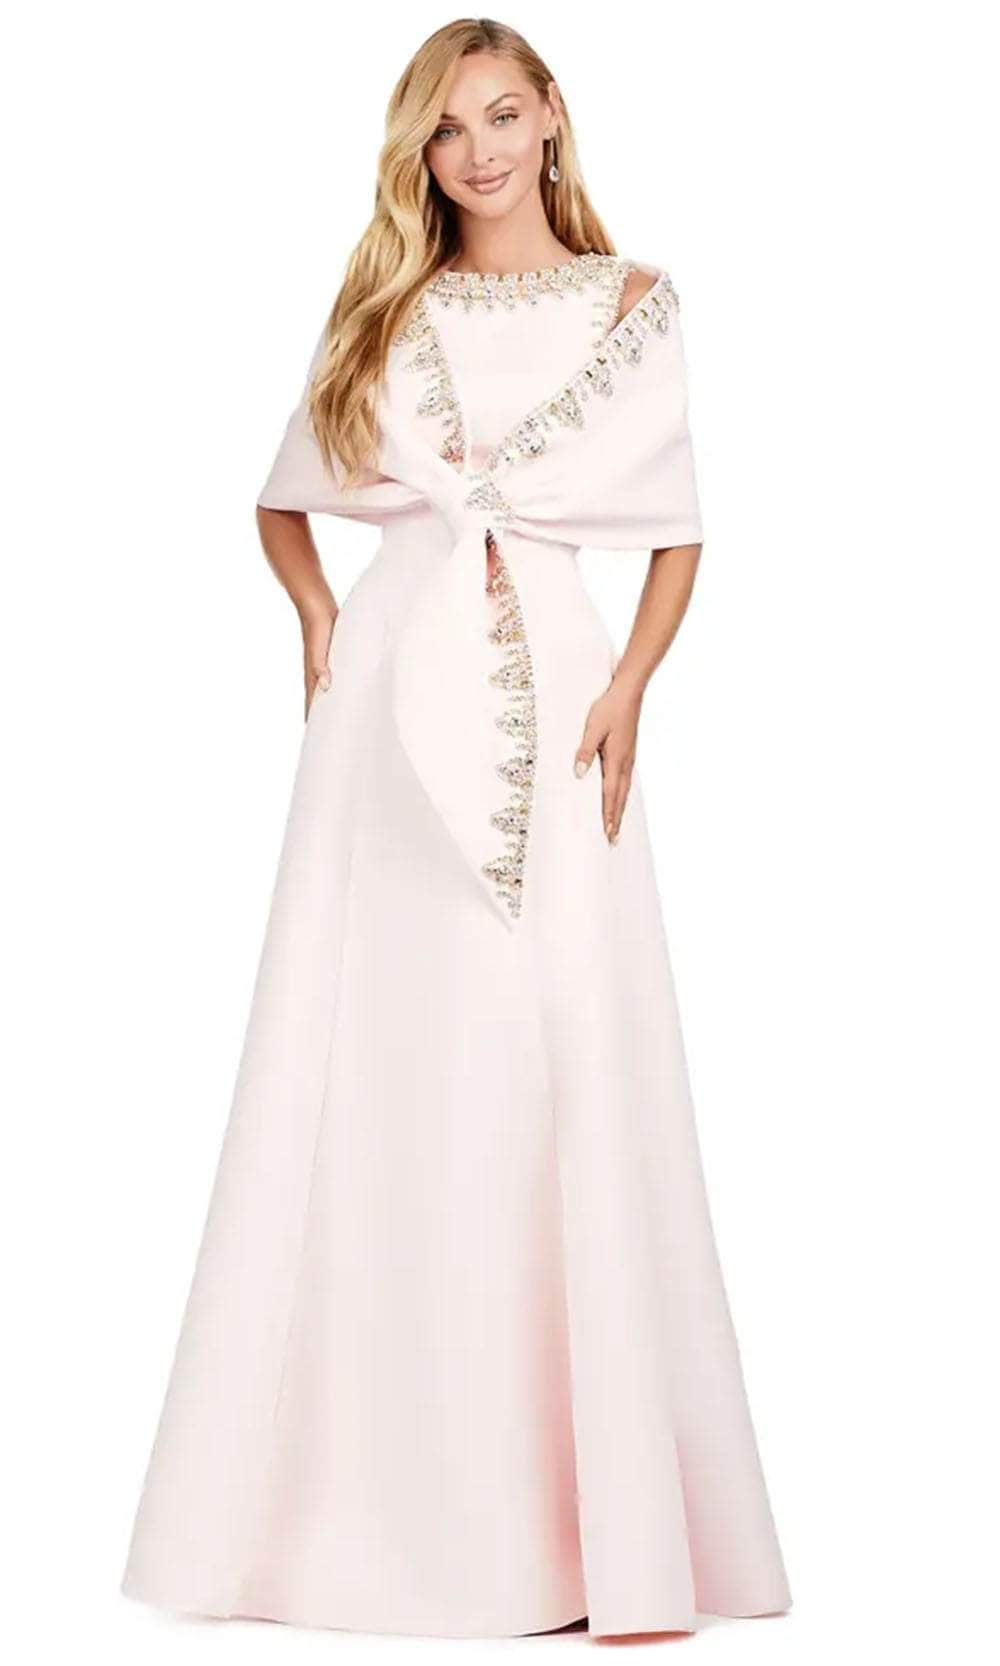 Image of Ashley Lauren 11426 - Sleeveless Satin Gown with Shawl